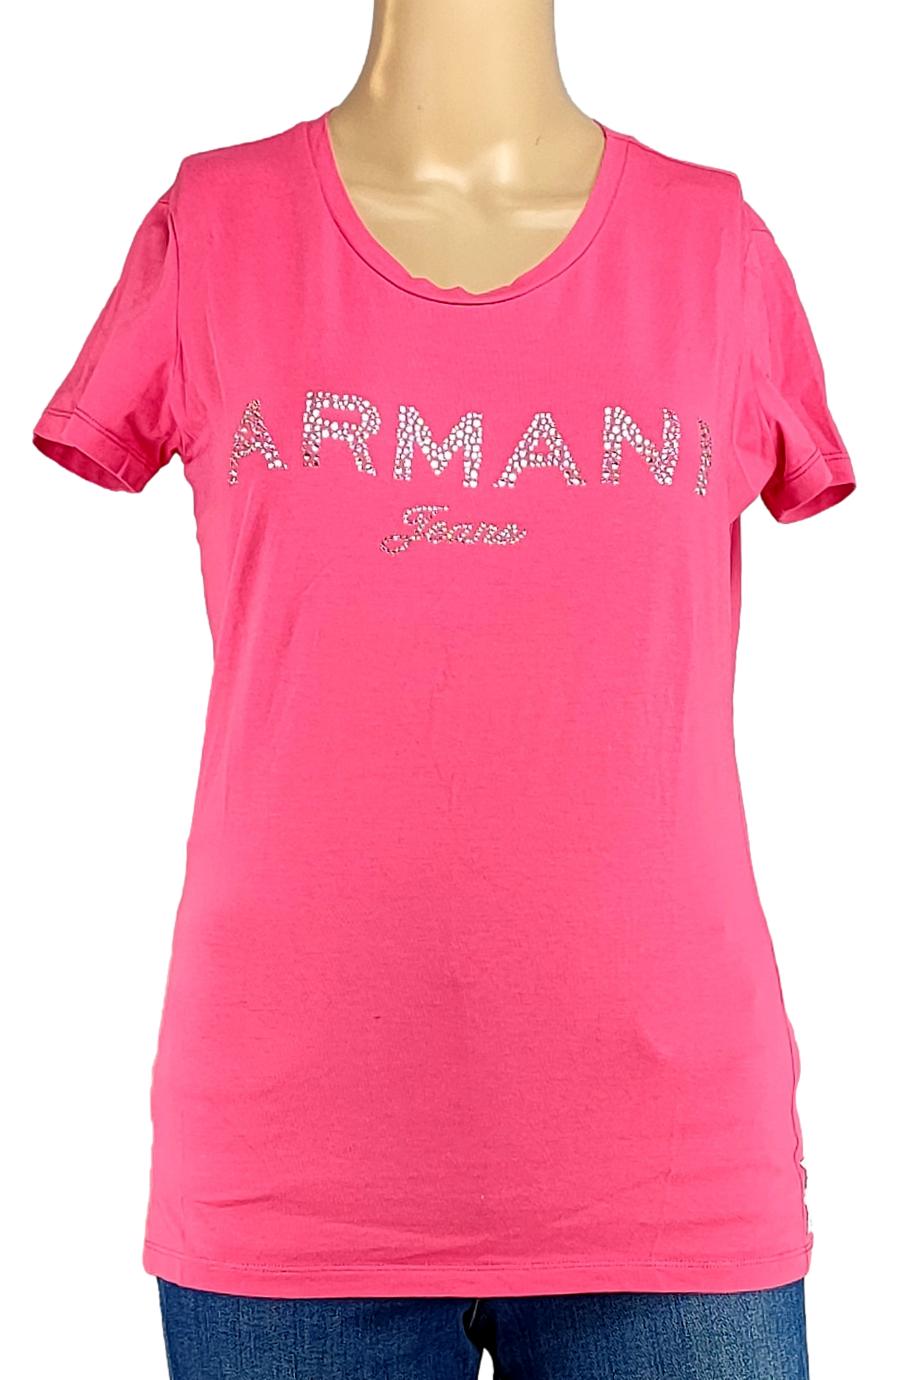 T-shirt Armani jeans - taille 40